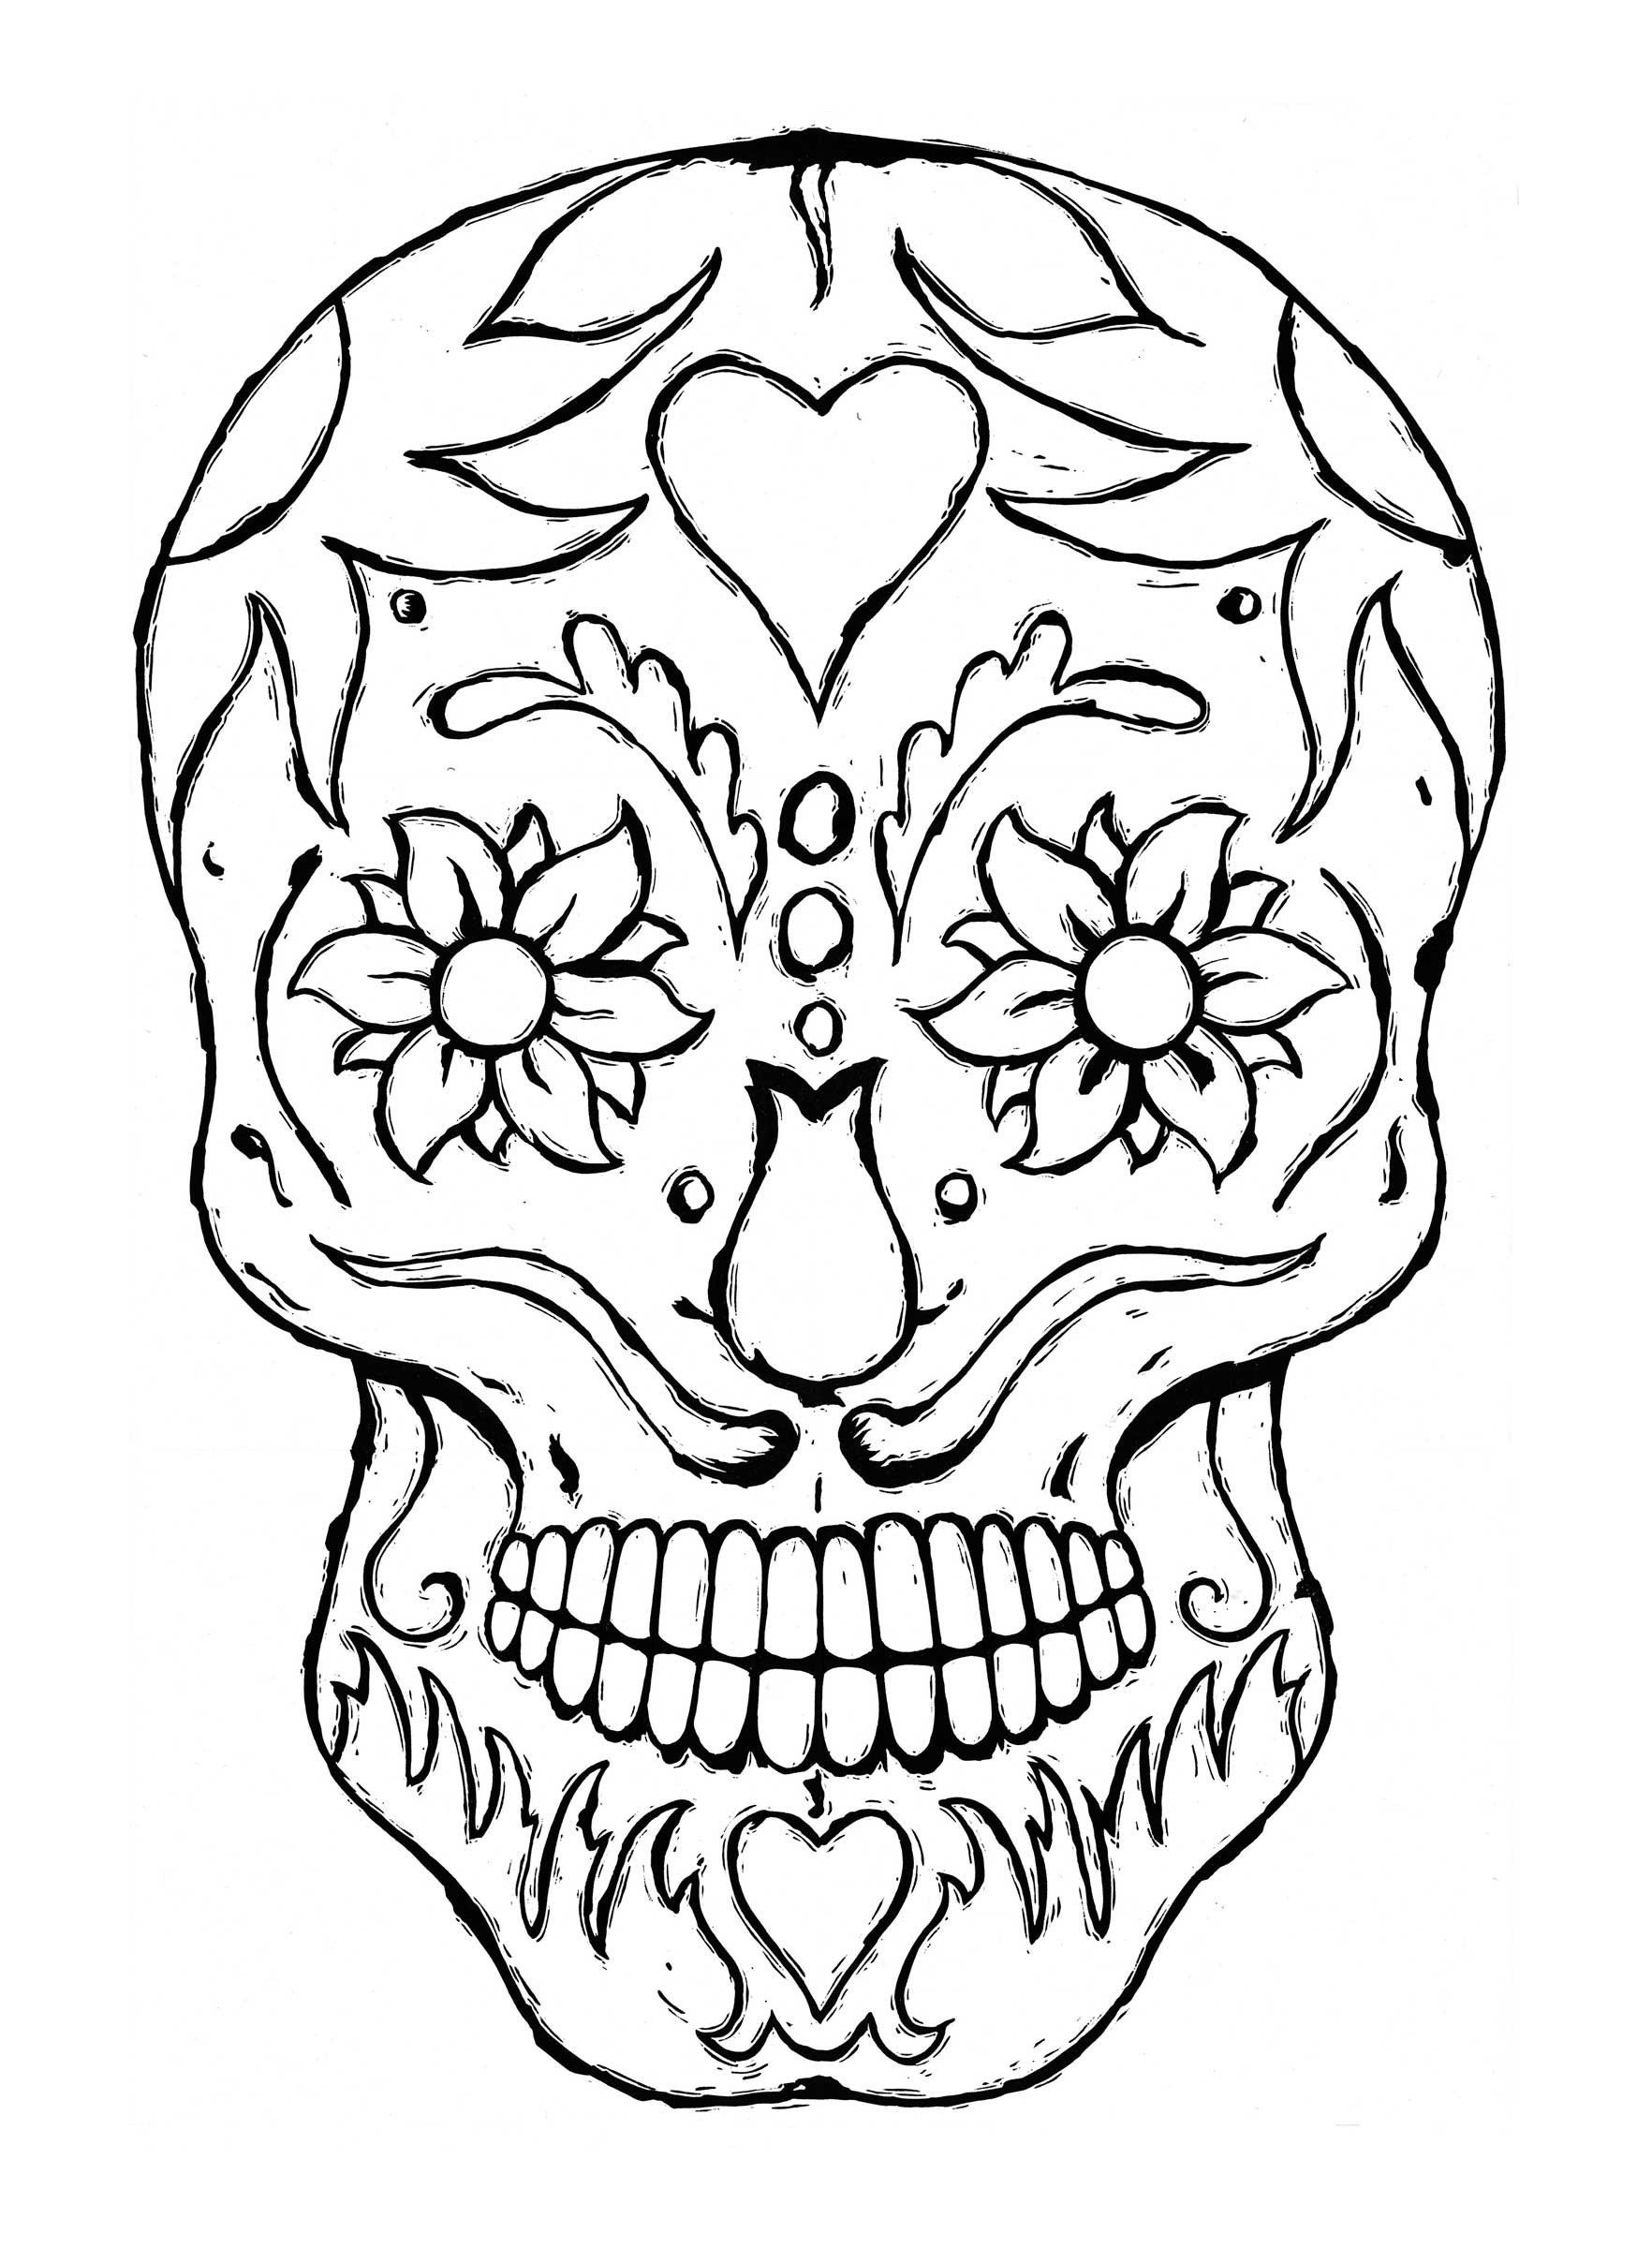 free cool coloring pages for teenagers | Best Coloring Page Site